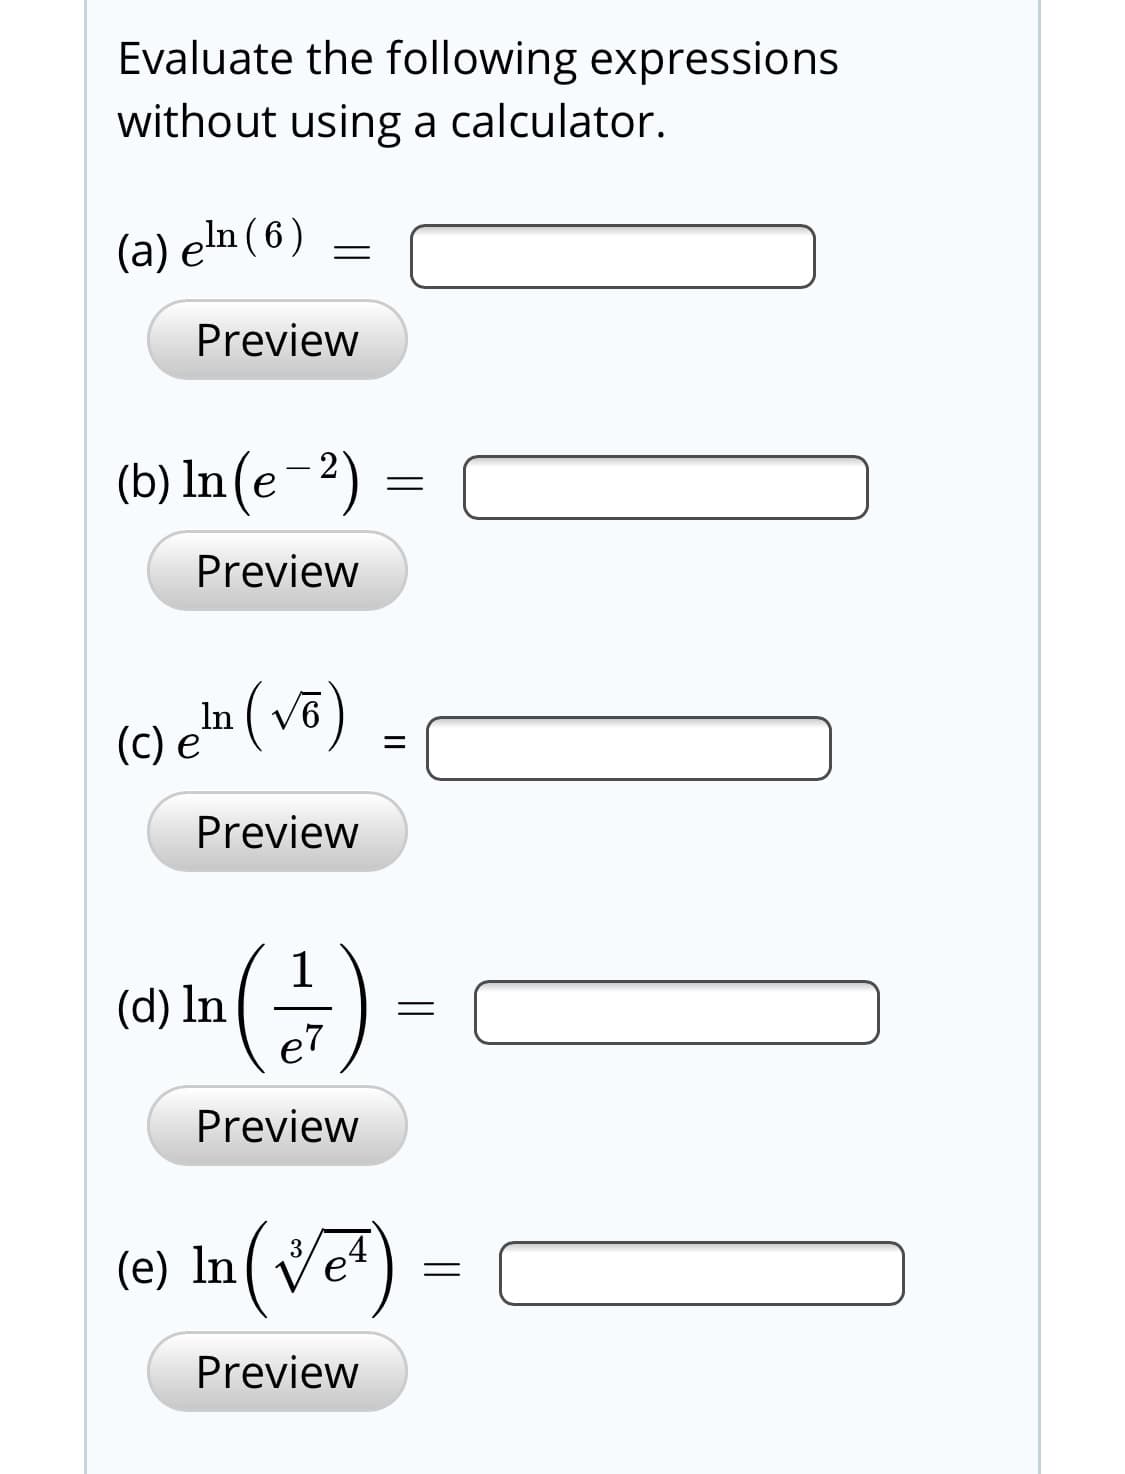 Evaluate the following expressions
without using a calculator.
(a) eln ( 6 )
Preview
(b) ln(e-2) =
Preview
(c) e'n (võ)
Preview
(d) In
e7
Preview
(e) In( Veª)
Preview
